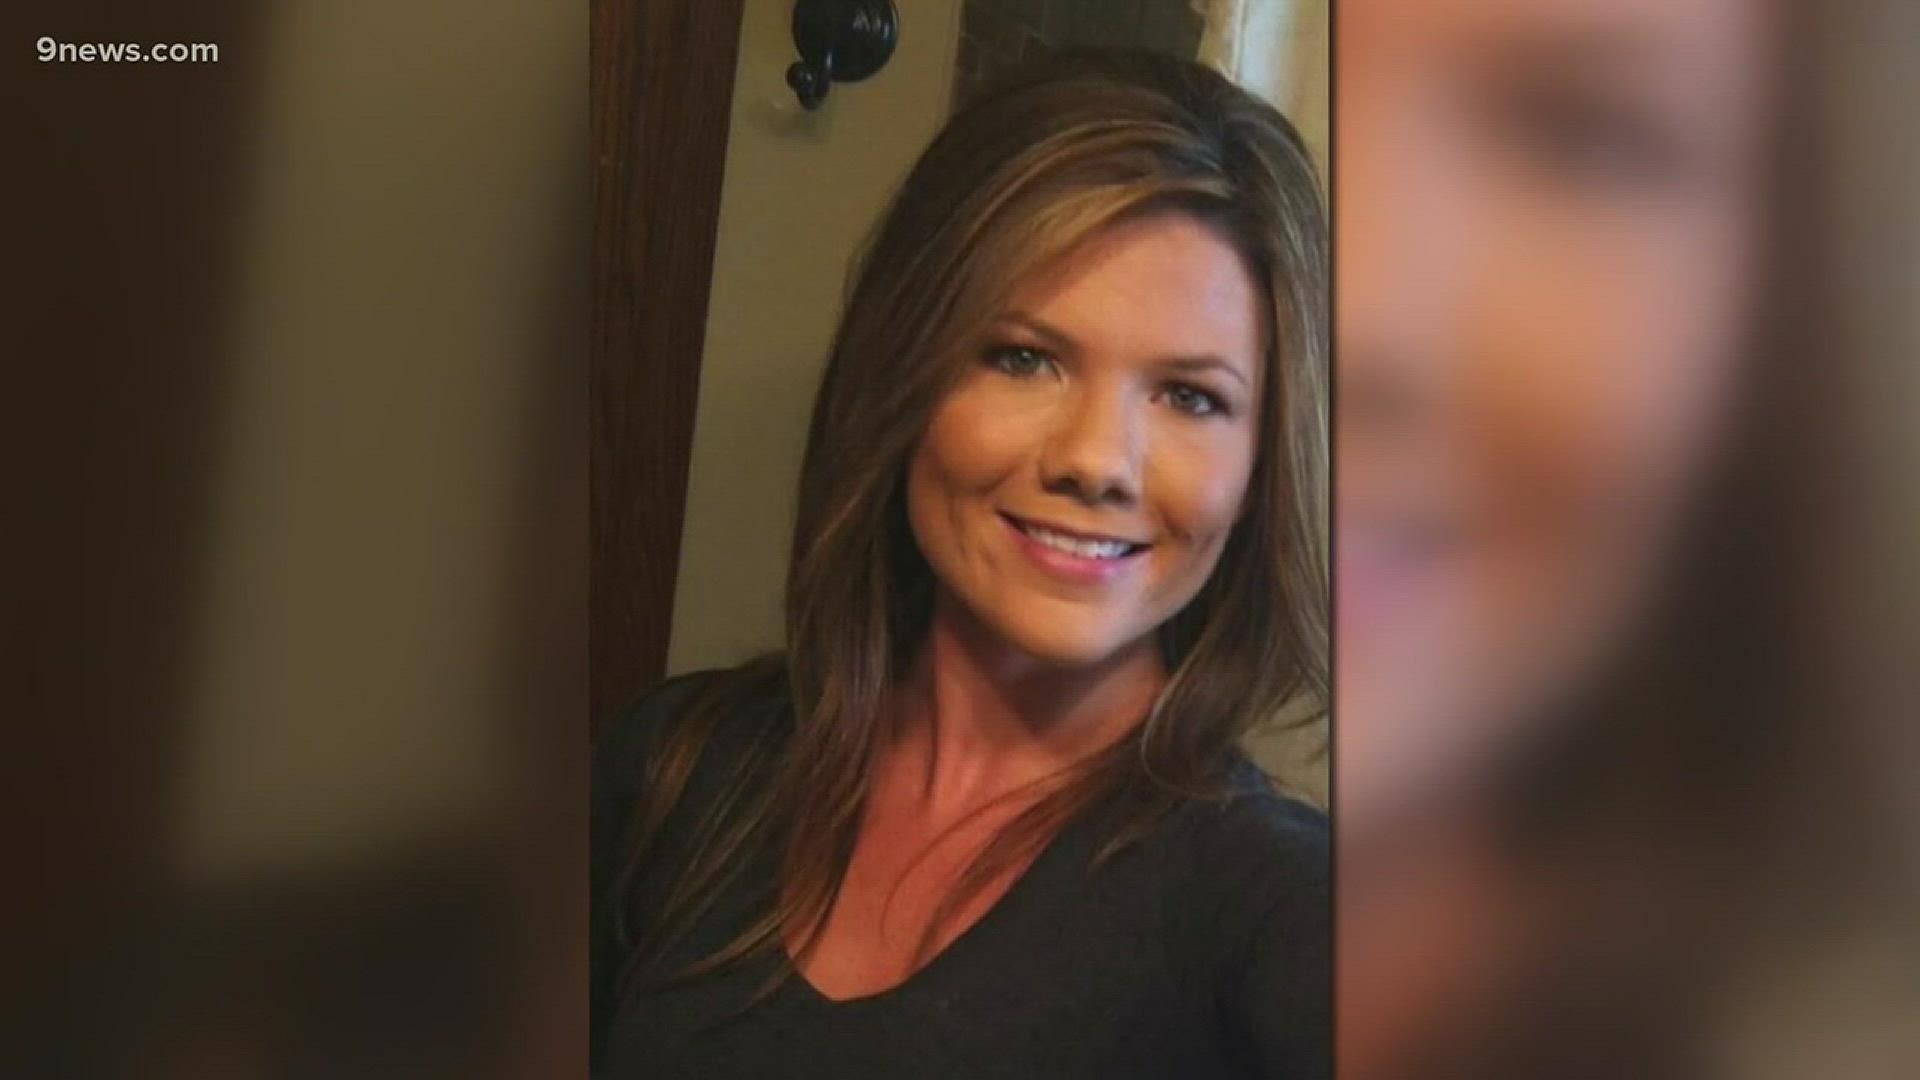 The daughter of the Colorado woman who has been missing since Thanksgiving will remain in the custody of her maternal grandparents, at least until a further hearing.